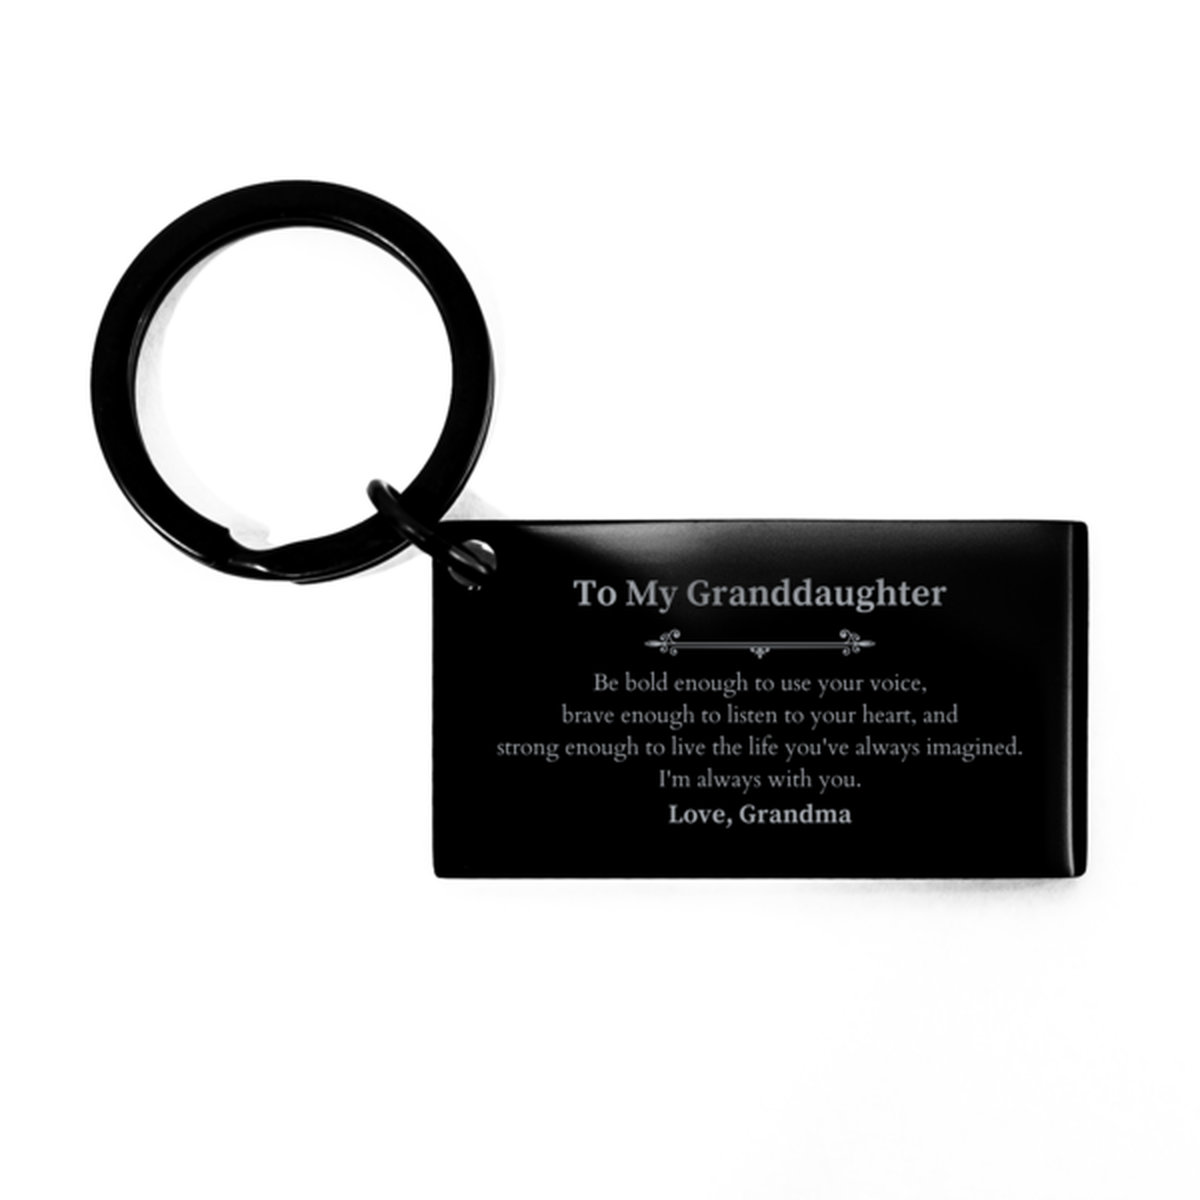 Keepsake Granddaughter Keychain Gift Idea Graduation Christmas Birthday Granddaughter from Grandma, Granddaughter Be bold enough to use your voice, brave enough to listen to your heart. Love, Grandma